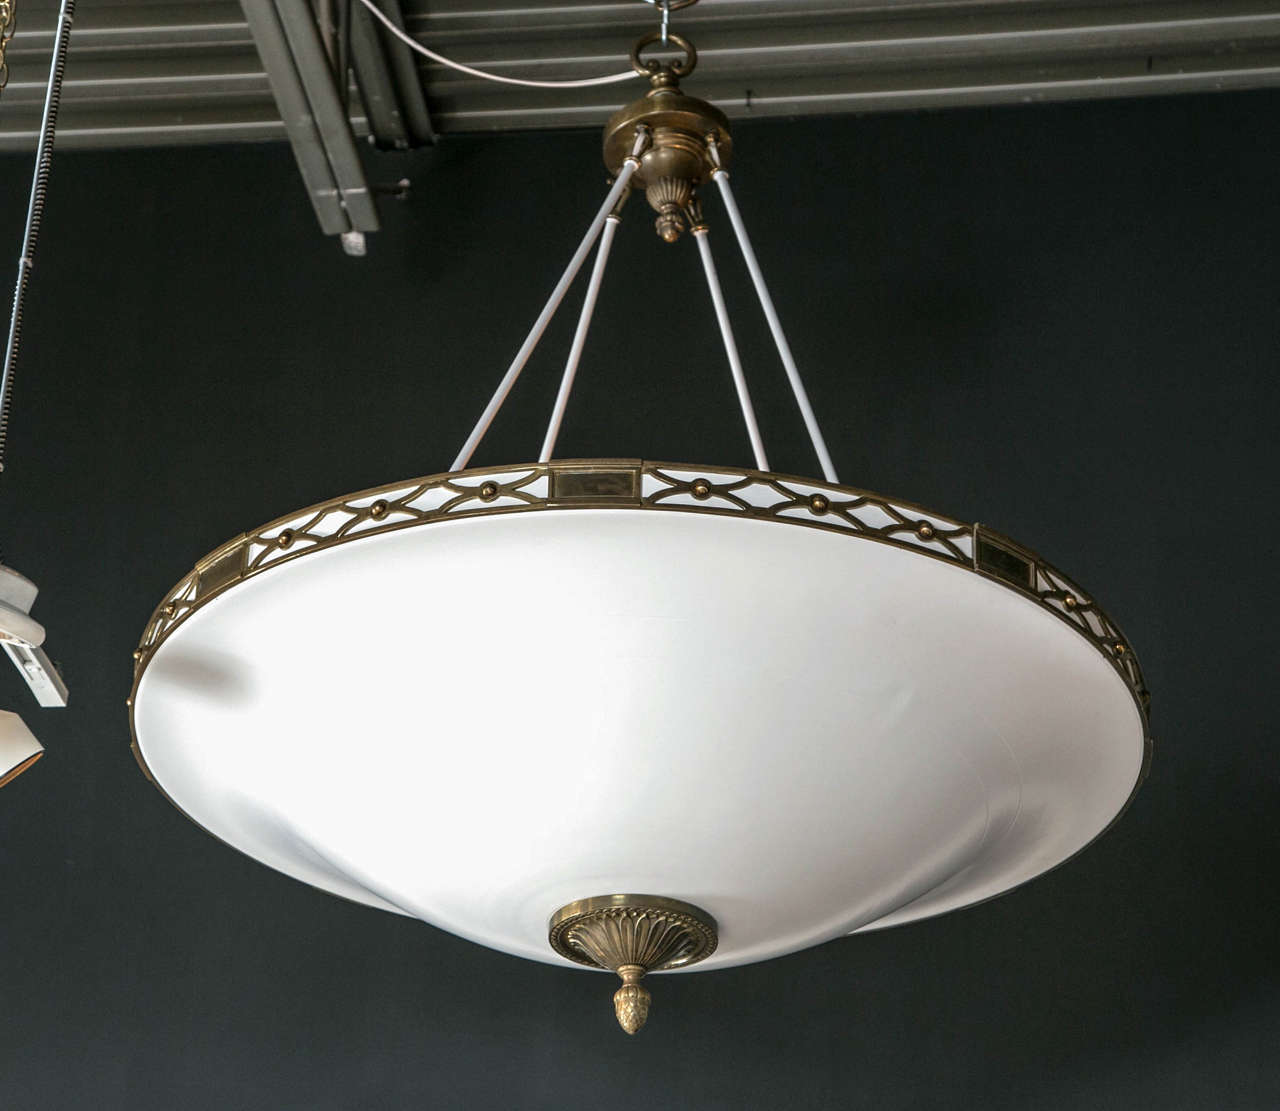 A large white painted dish shape metal chandelier with brass band decor. Newly rewired.